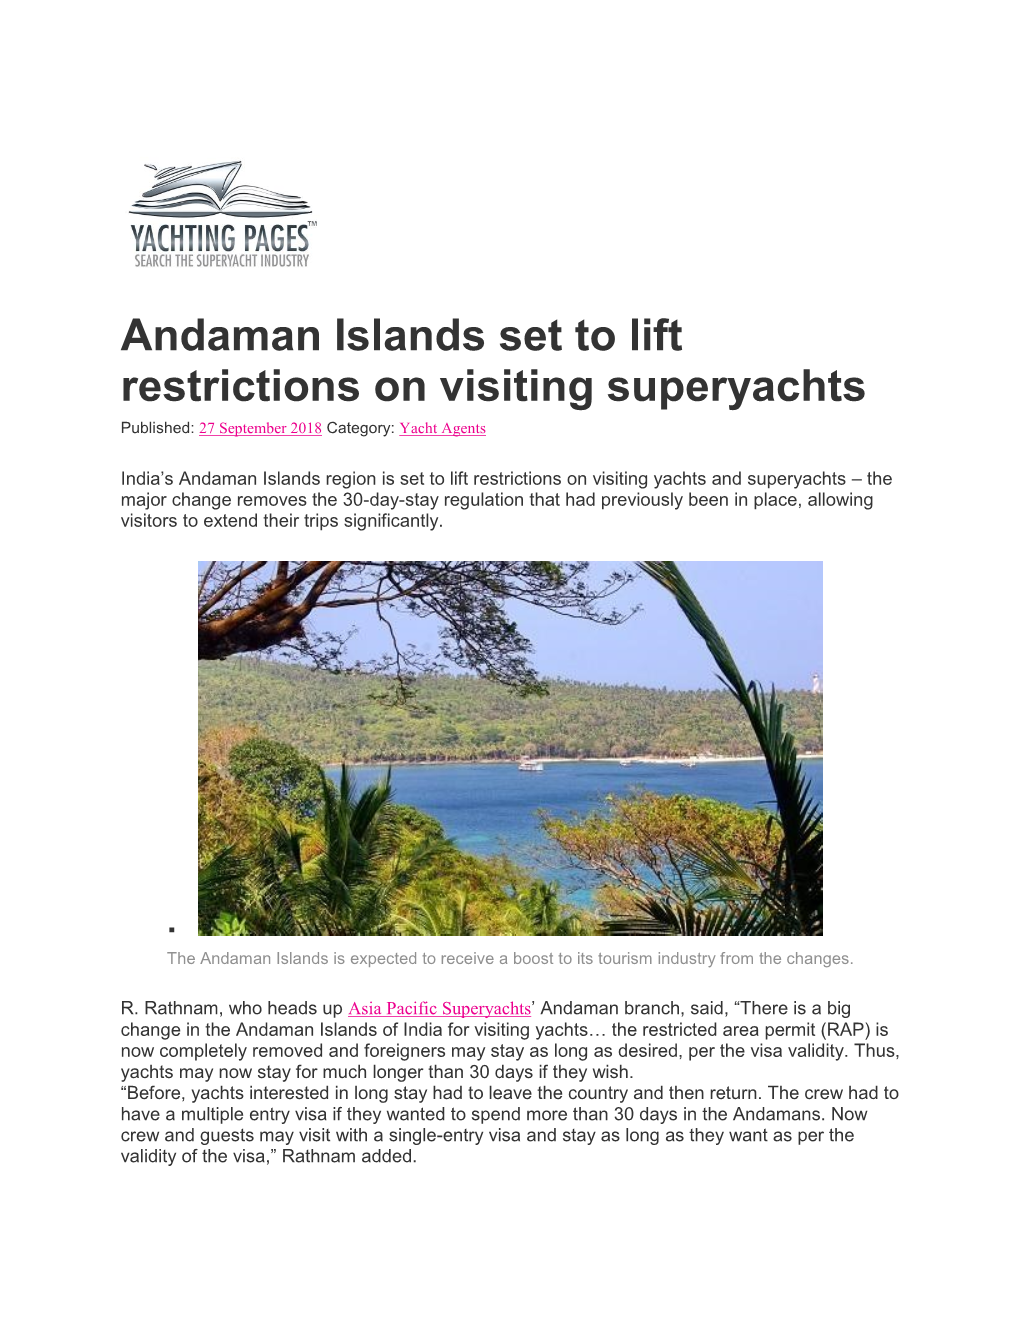 Andaman Islands Set to Lift Restrictions on Visiting Superyachts Published: 27 September 2018 Category: Yacht Agents